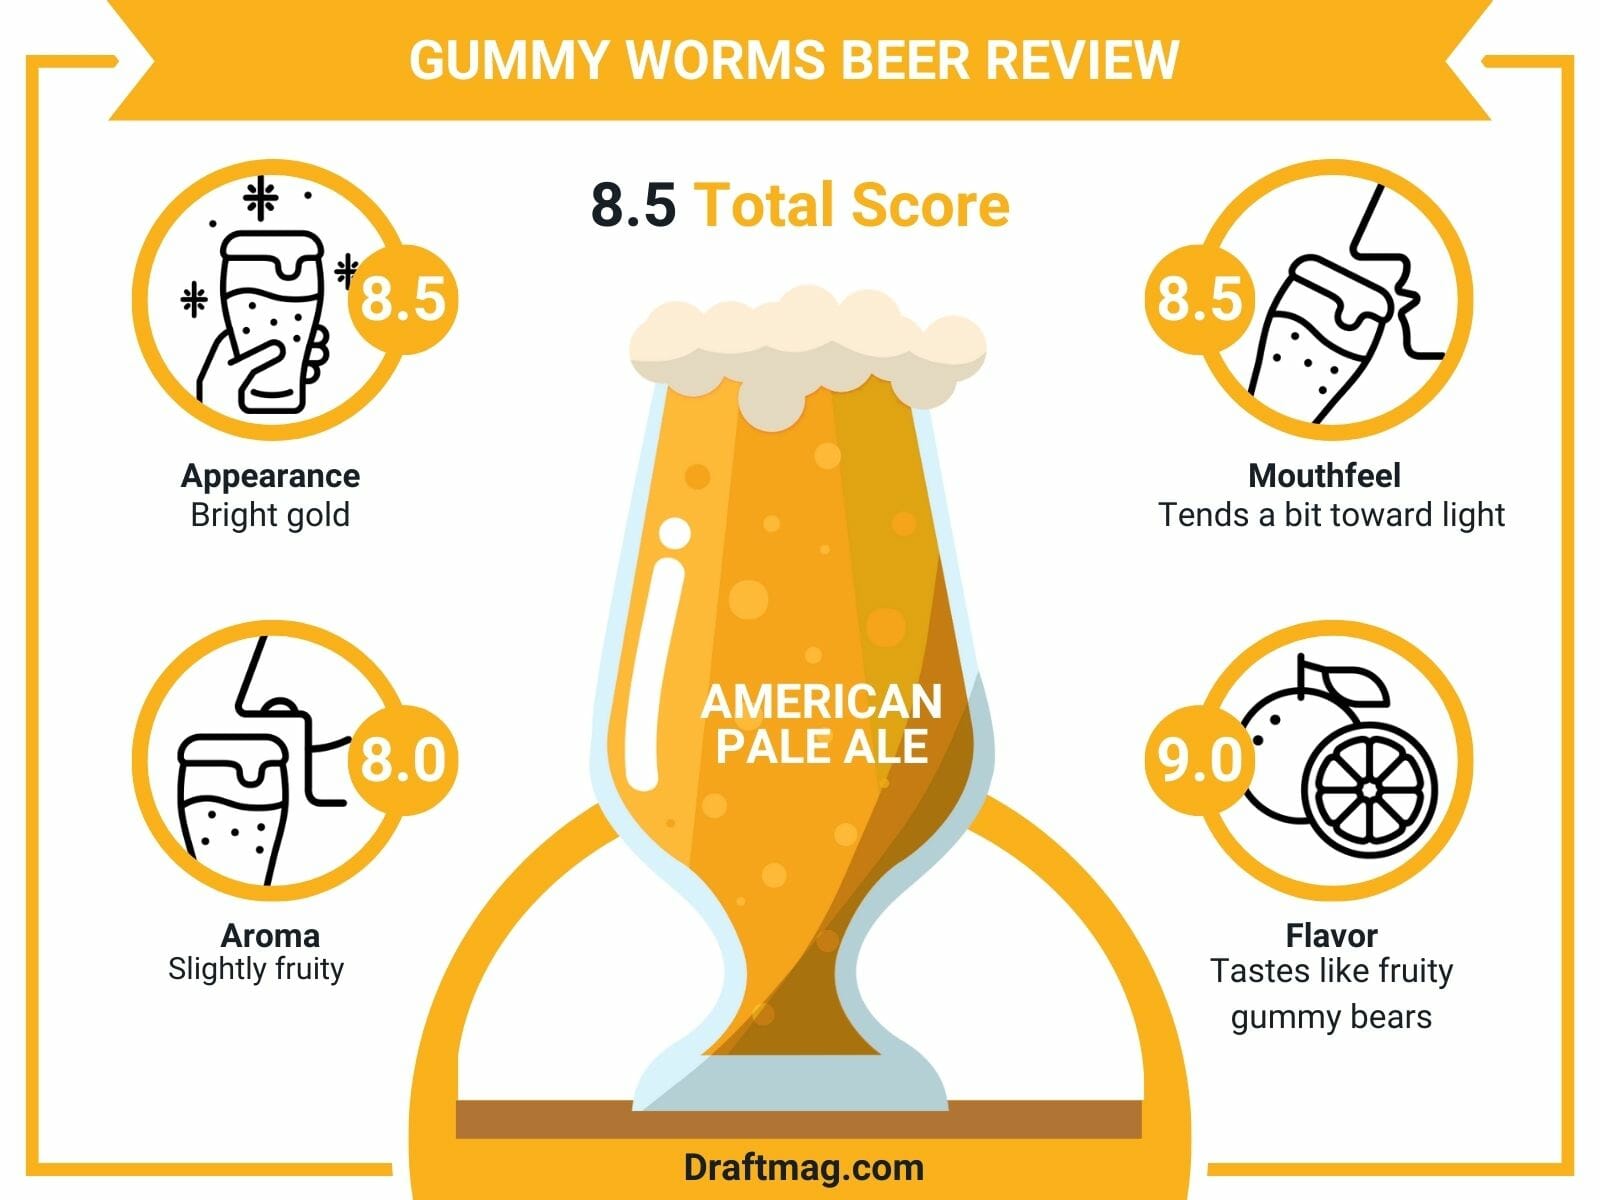 Gummy Worms Beer Review Infographic